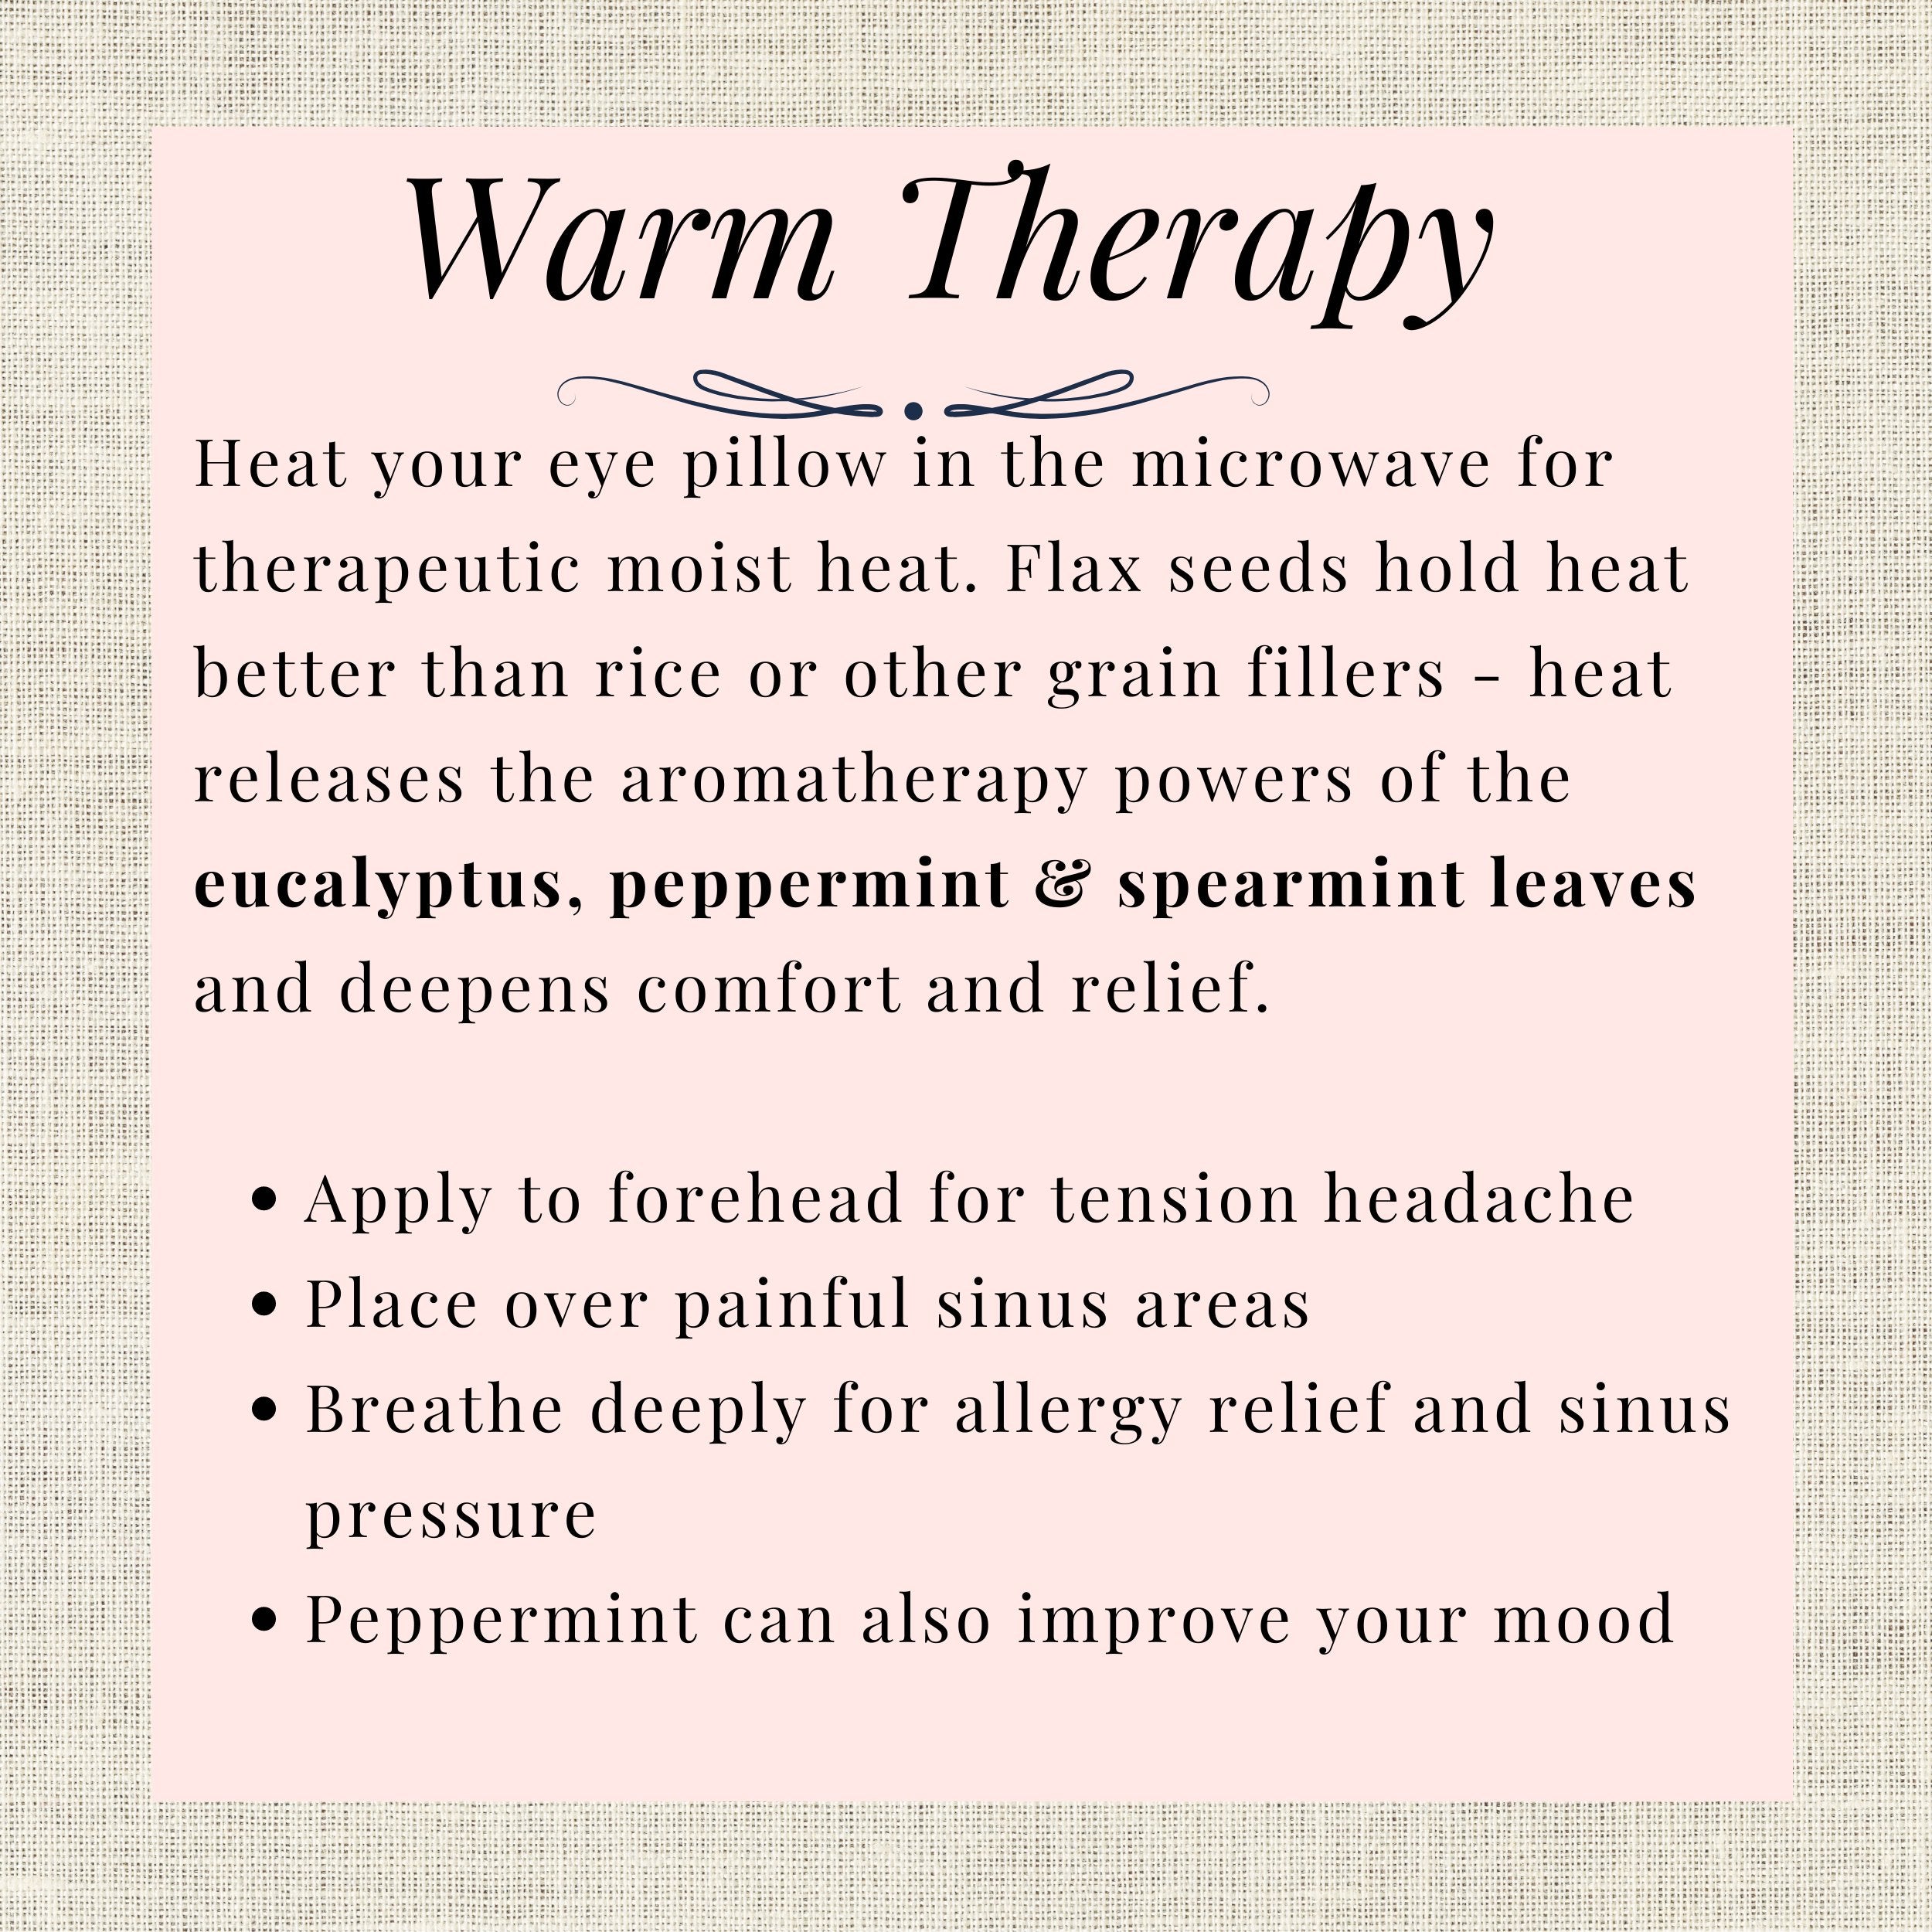 Detailed instructions for warm therapy eye pillow